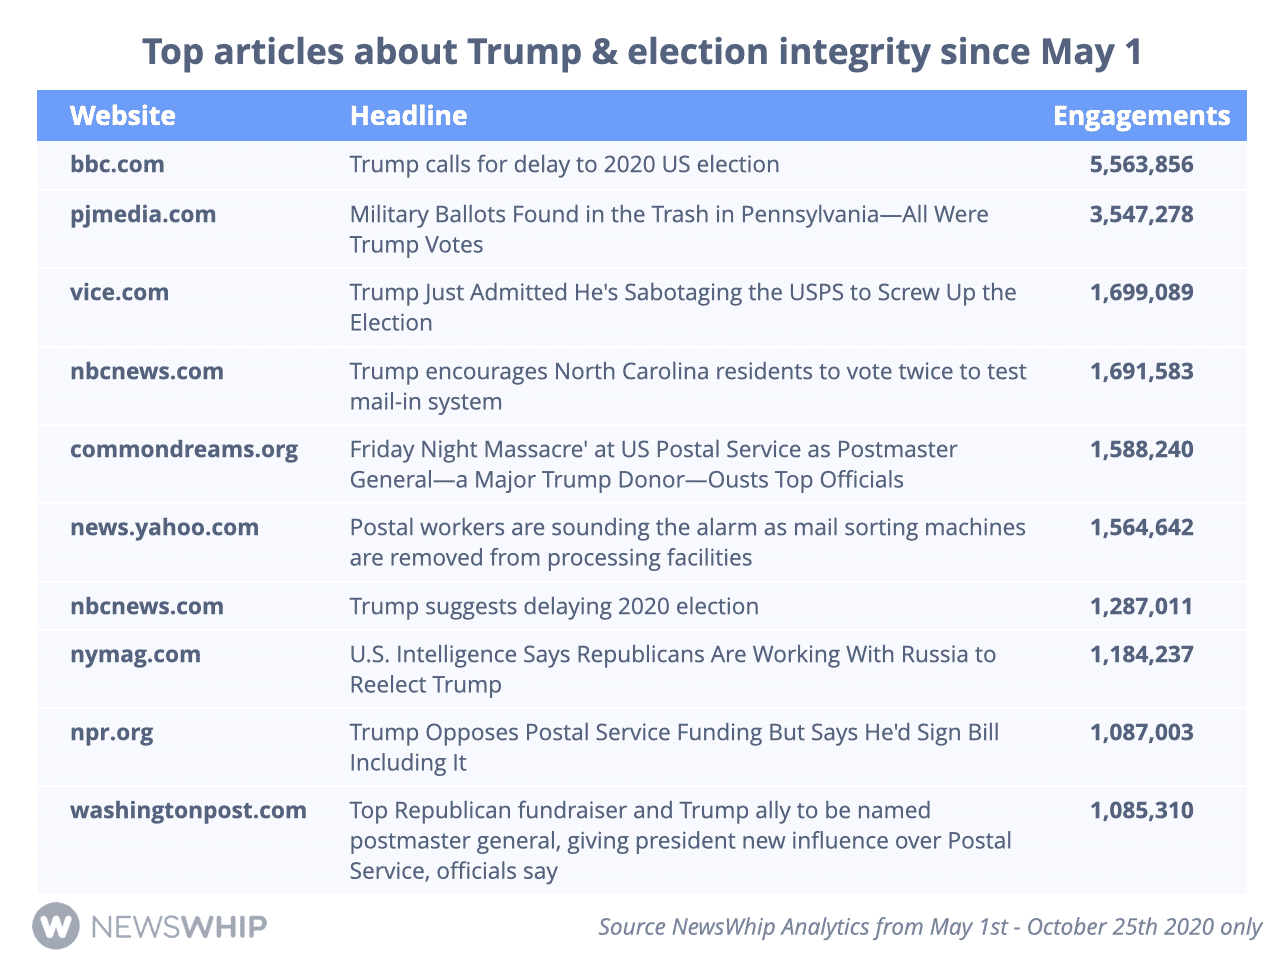 Chart showing the most engaged stories about President Trump and election integrity in 2020, ranked by engagement